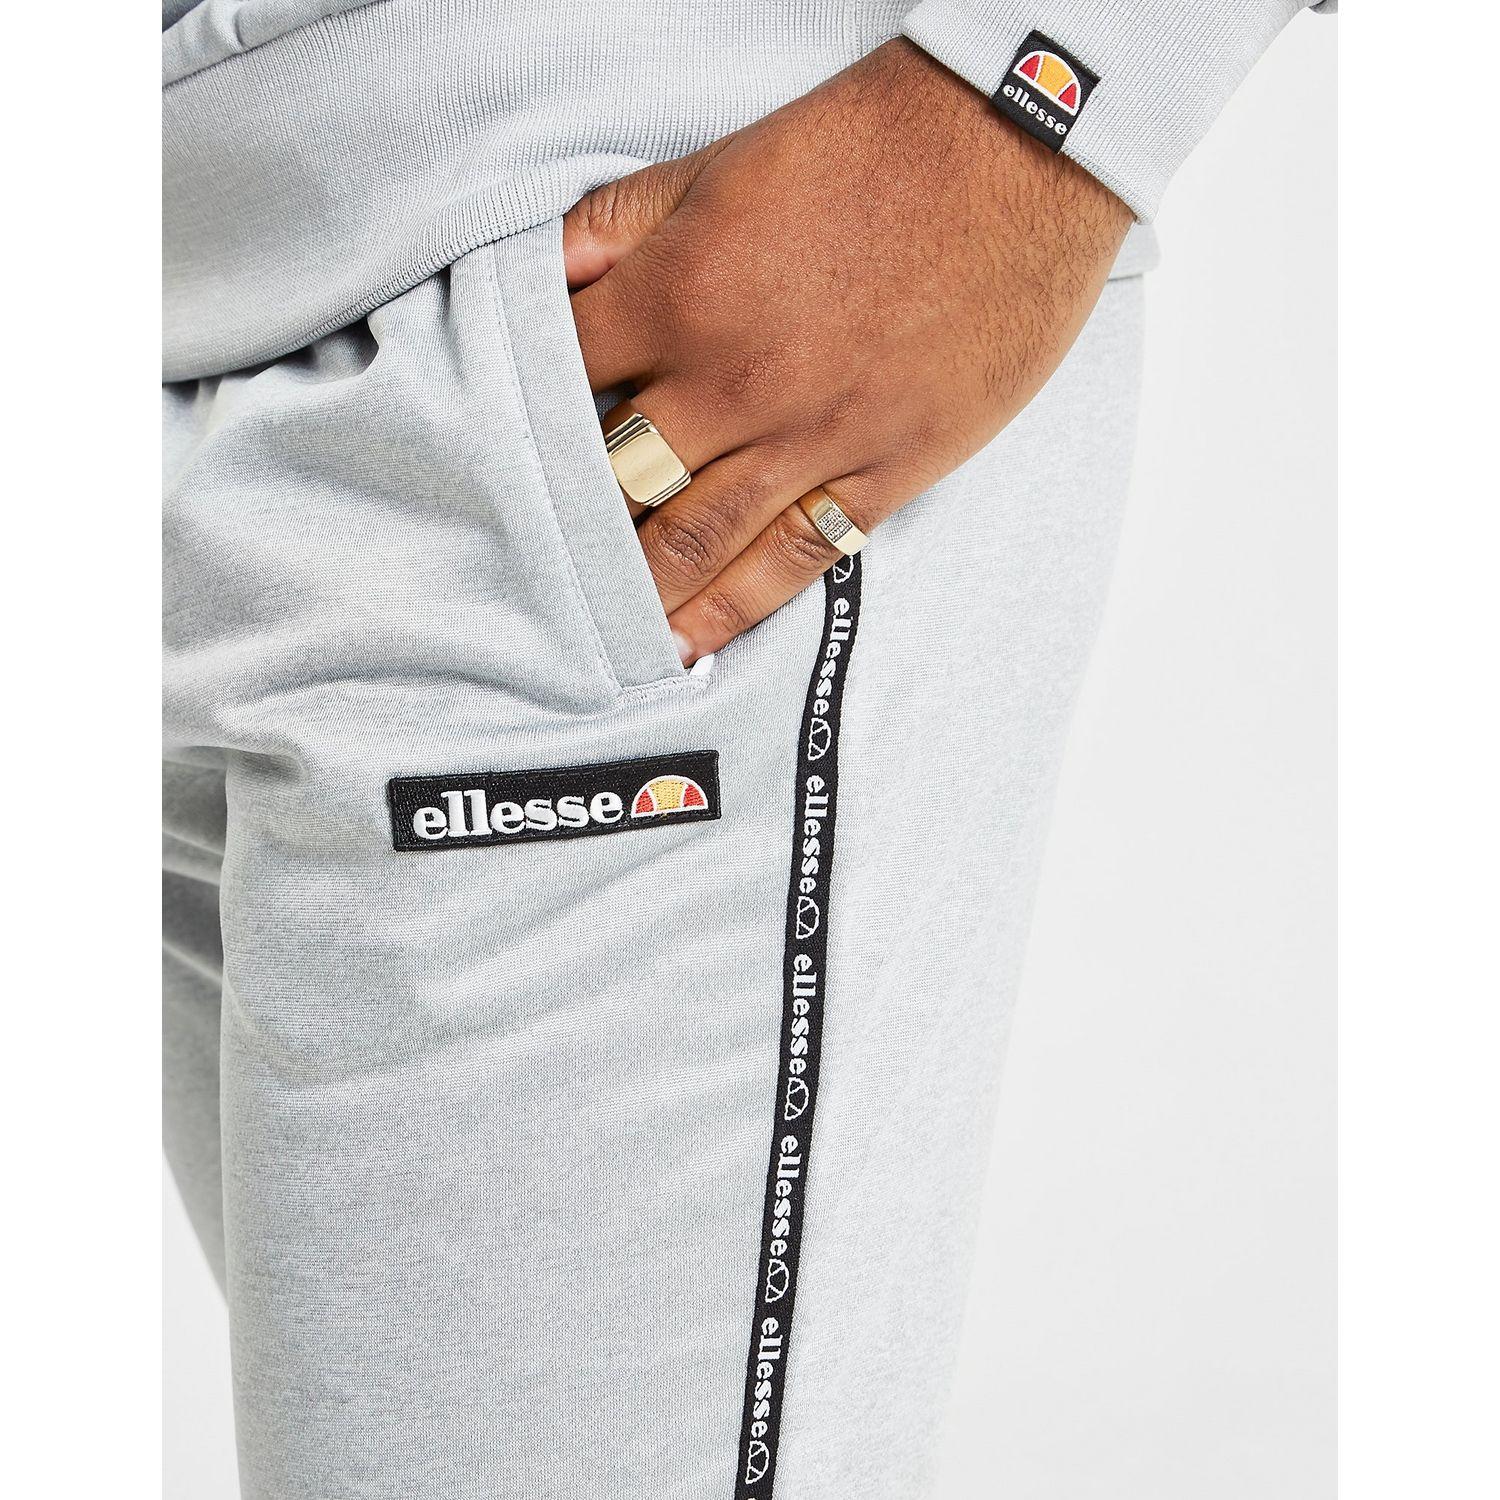 Ellesse Cotton Davide Poly Tape Joggers in Grey (Grey) for Men - Lyst